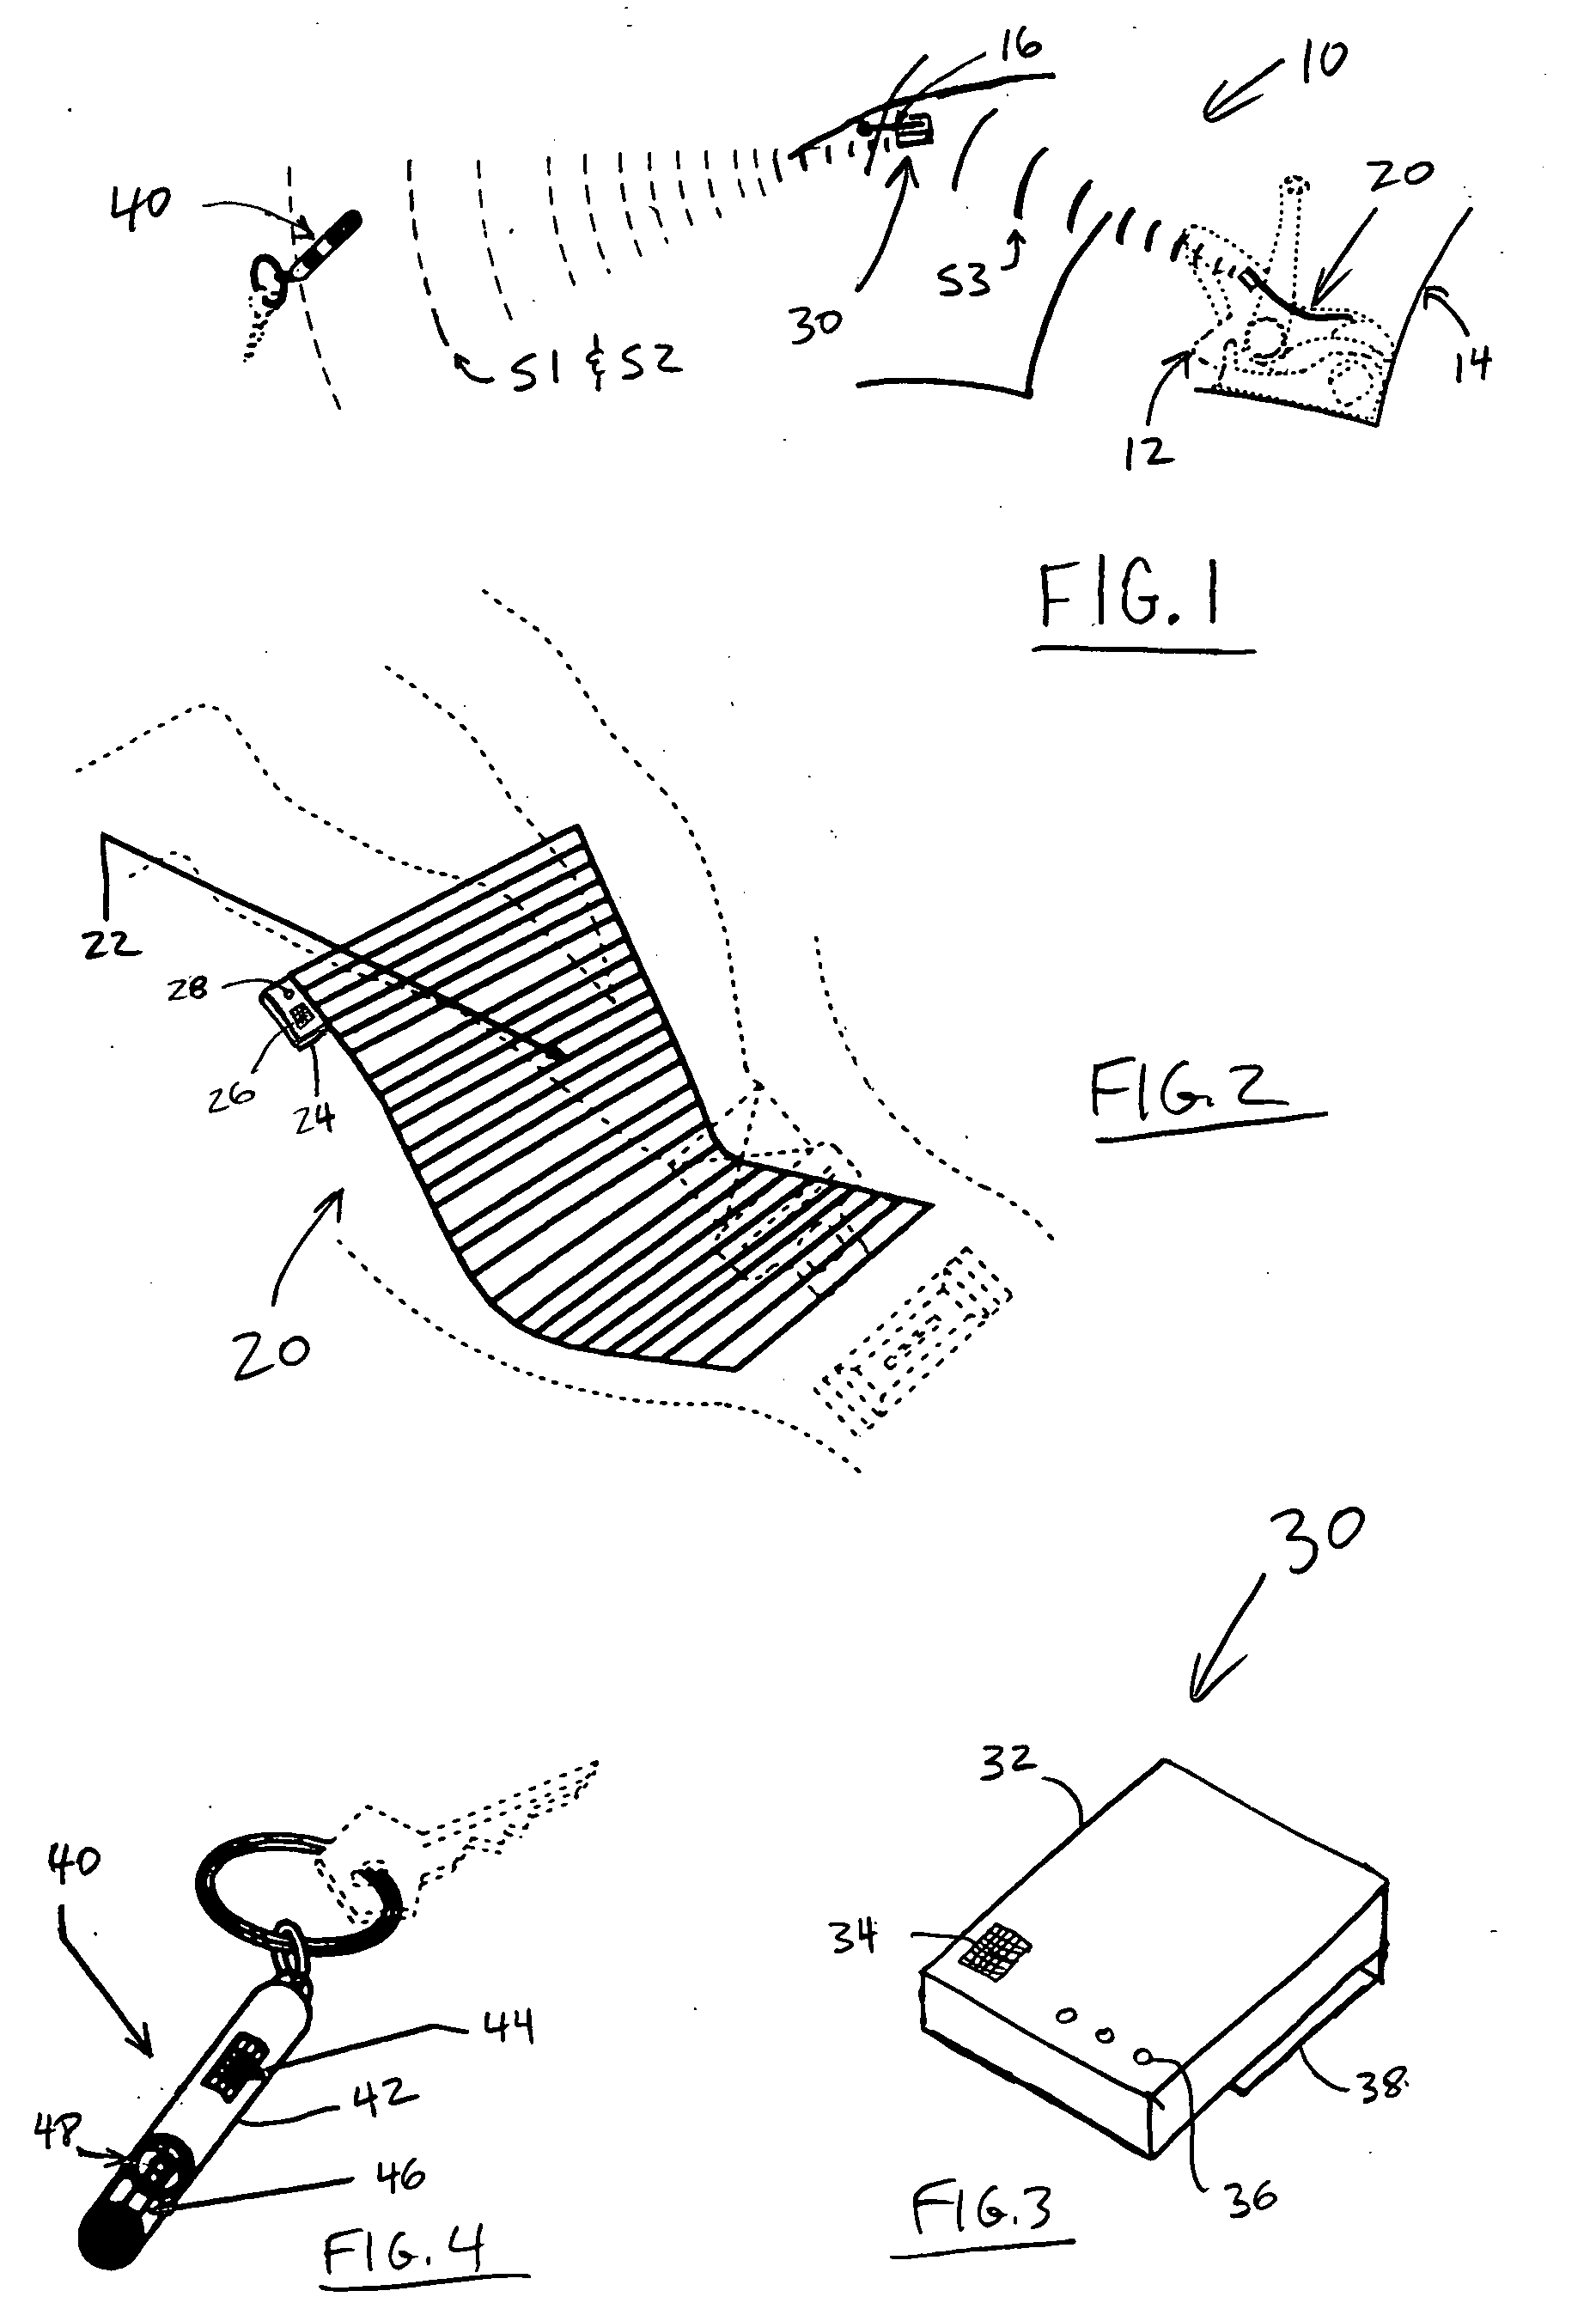 Object-proximity monitoring and alarm system